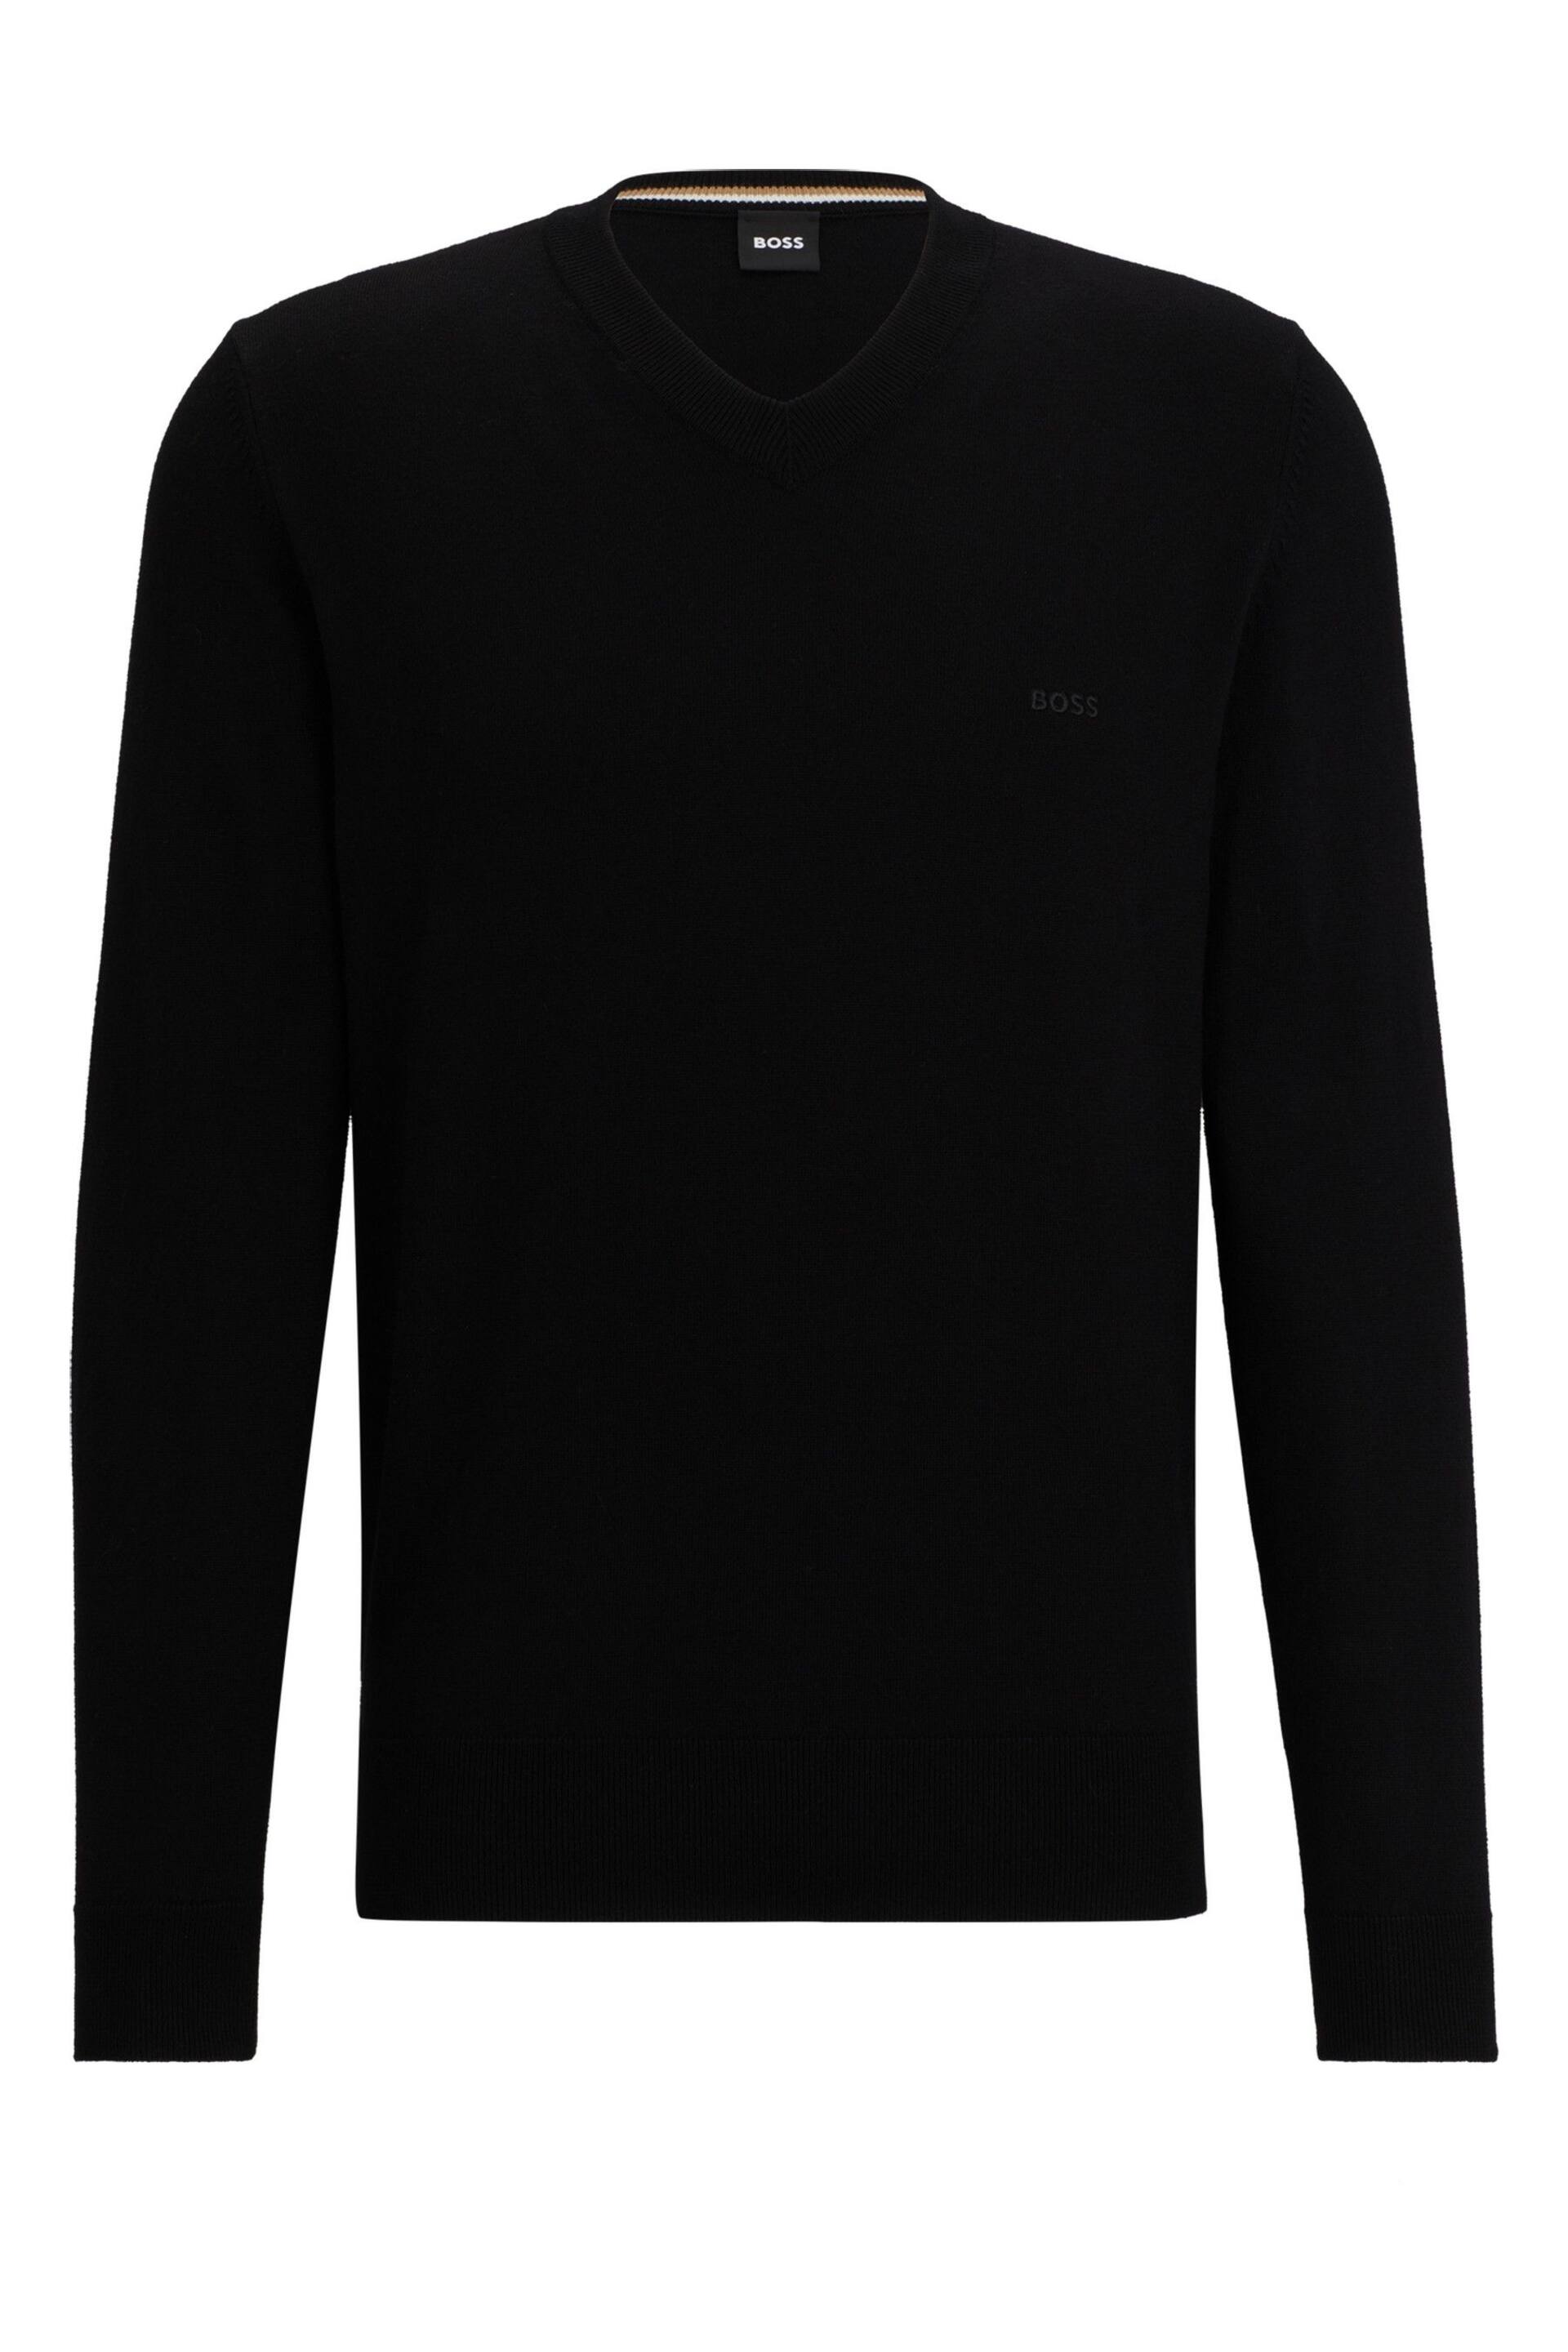 BOSS Black V-Neck Sweater in Cotton With Embroidered Logo - Image 5 of 5